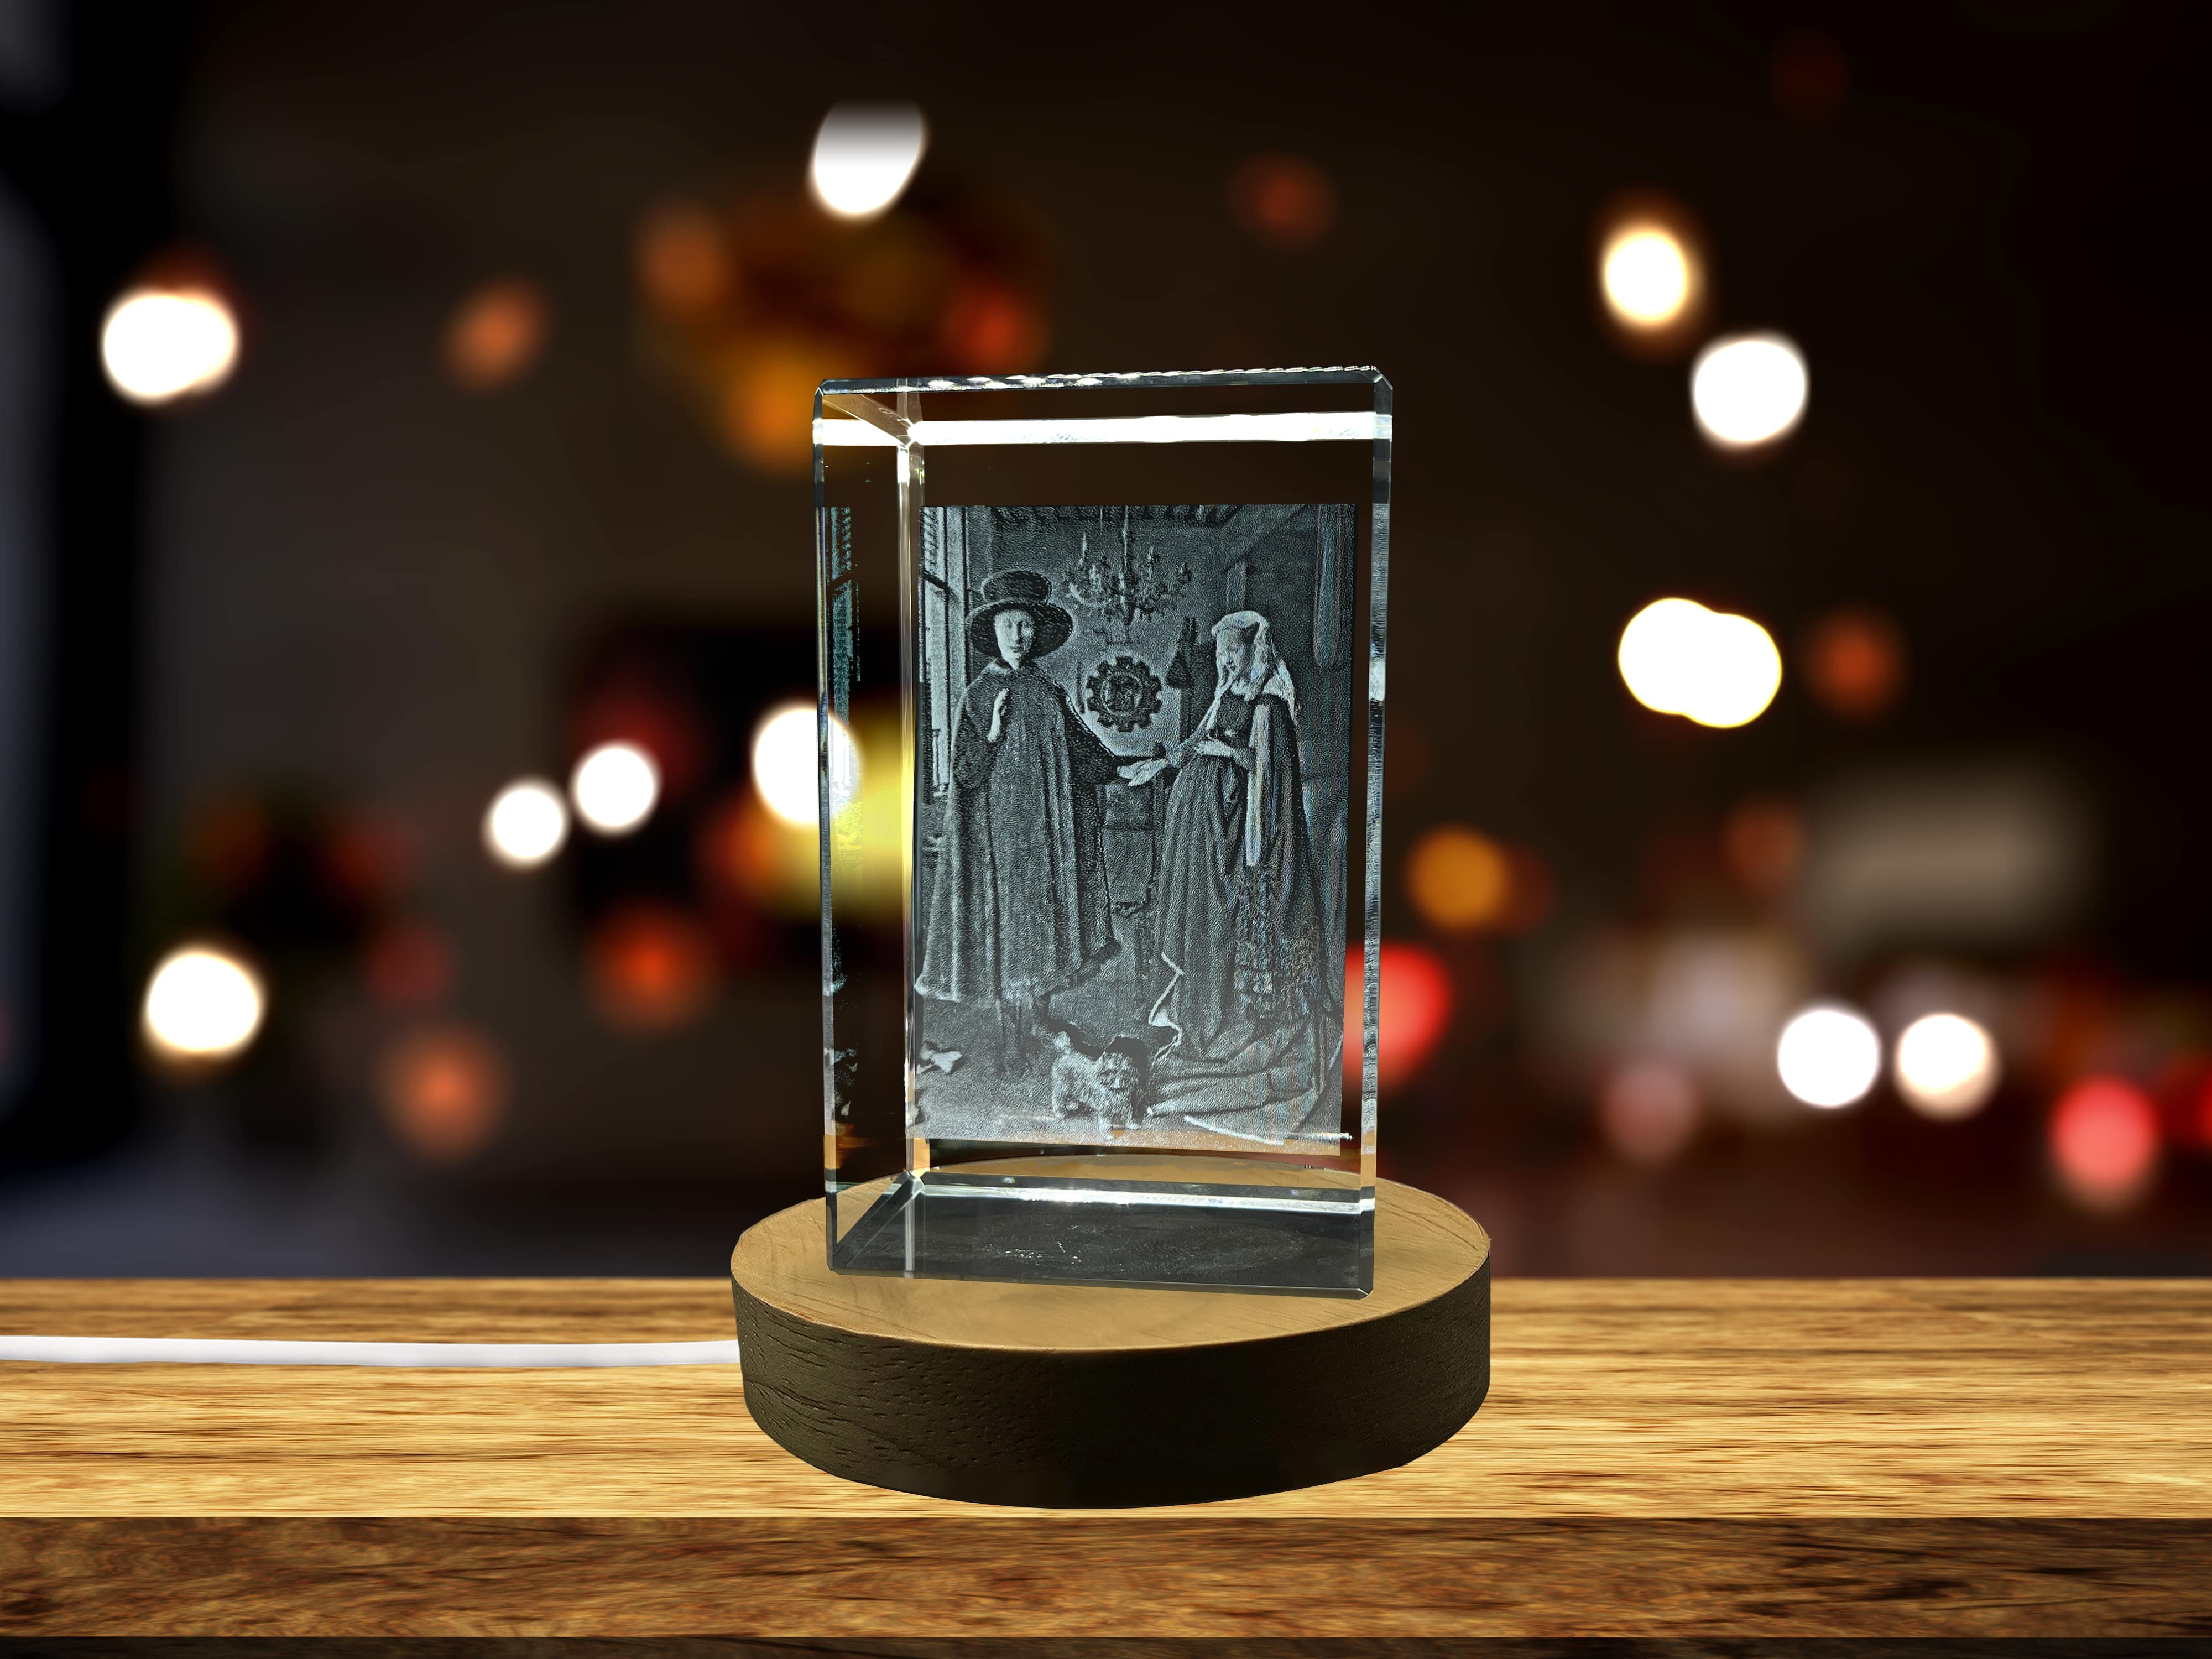 The Arnolfini Portrait 3D Engraved Crystal Decor with LED Base Light A&B Crystal Collection